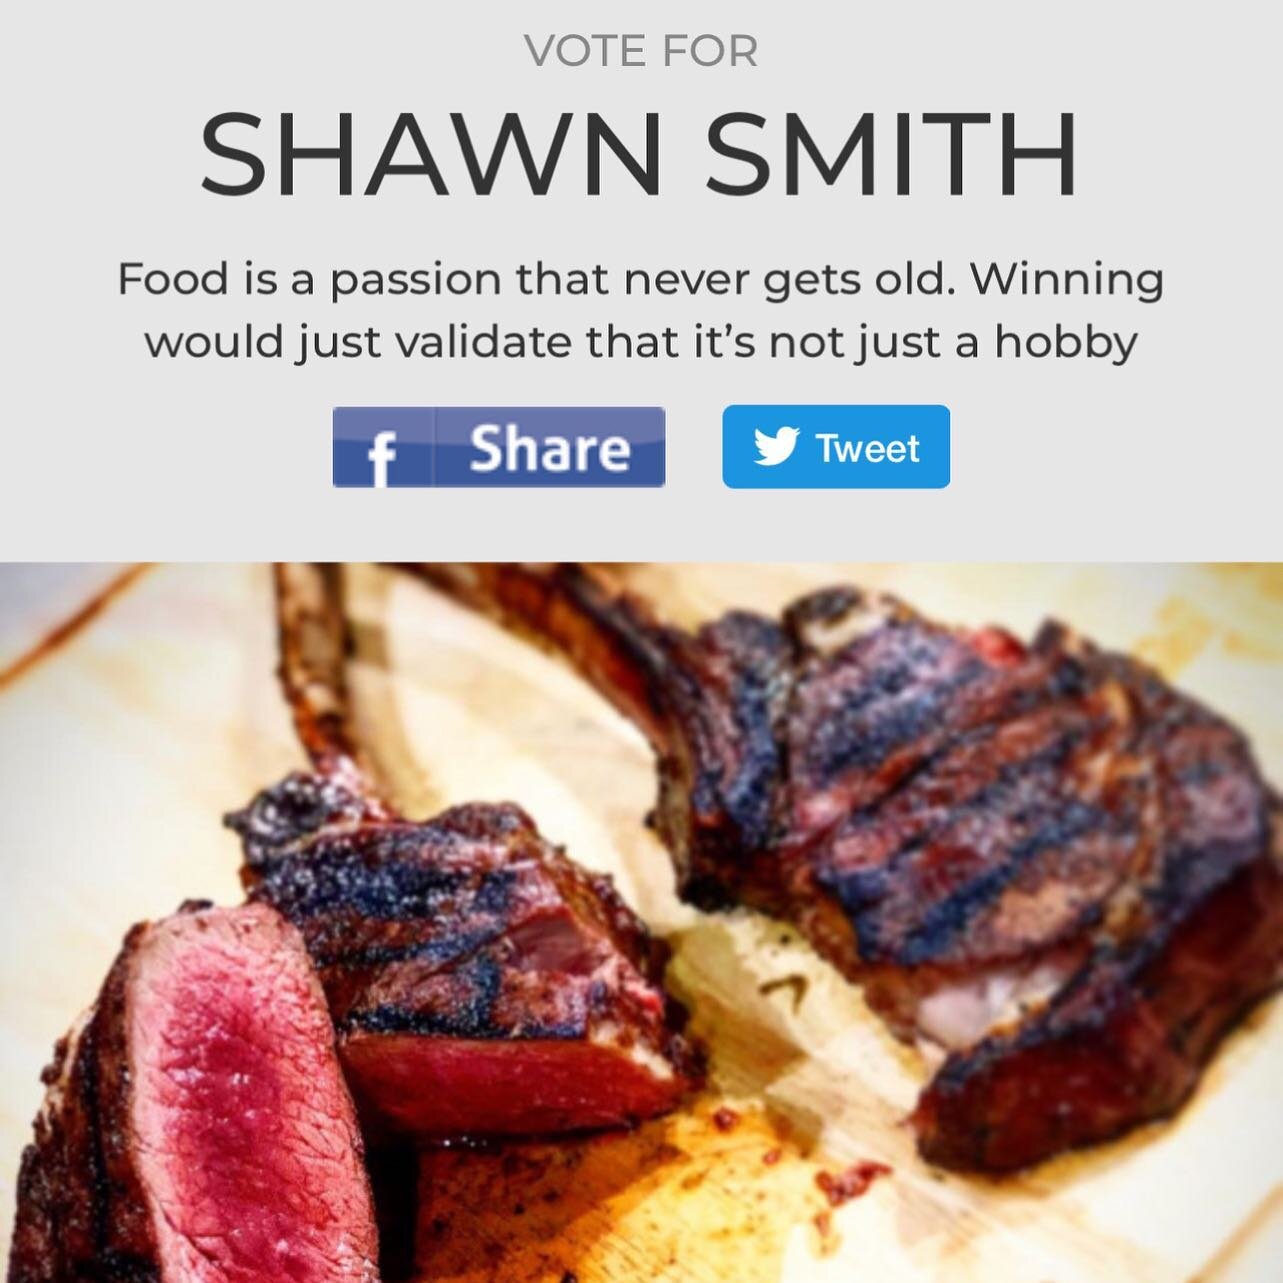 Having a little fun. Would love your vote. @favchef #favoritechef 
Link in bio